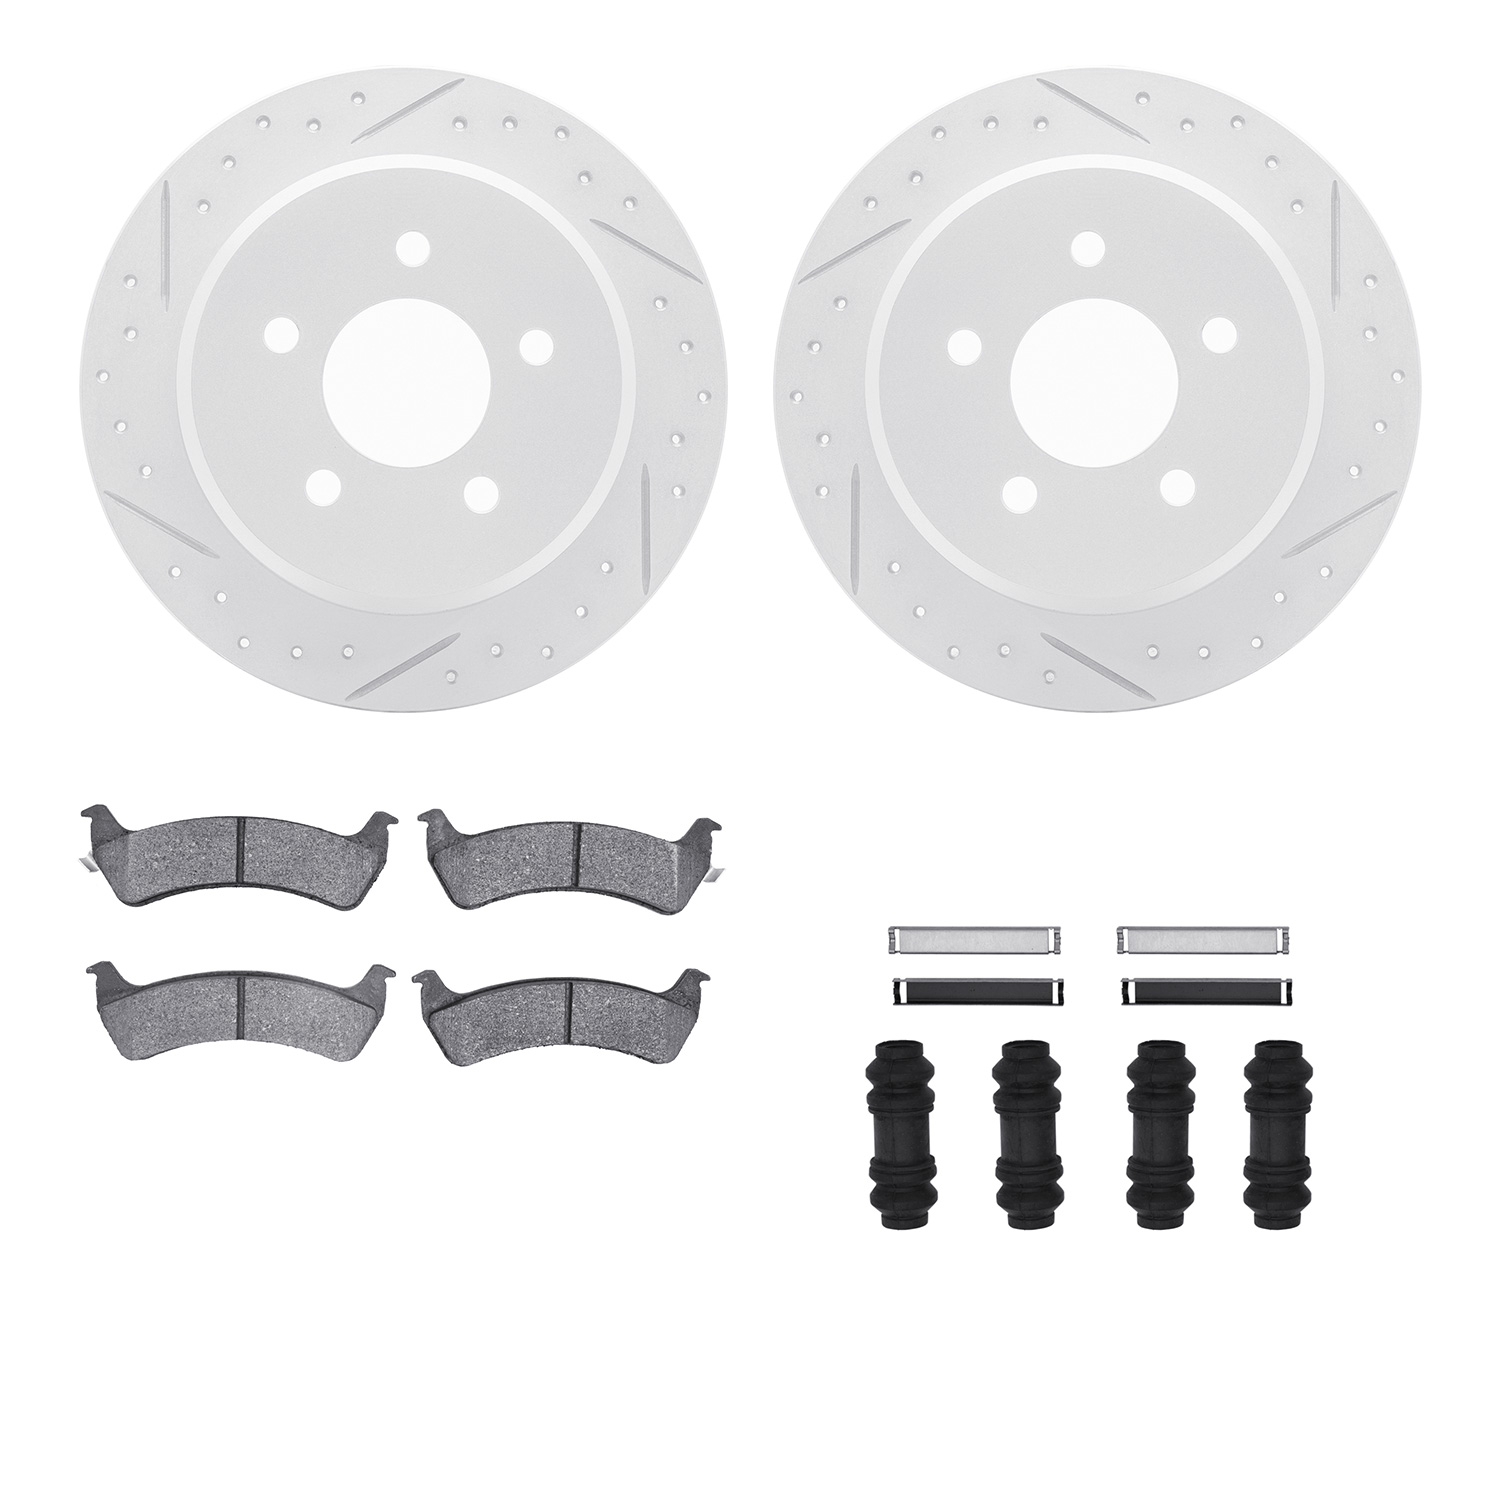 2212-99088 Geoperformance Drilled/Slotted Rotors w/Heavy-Duty Pads Kit & Hardware, 2001-2002 Ford/Lincoln/Mercury/Mazda, Positio